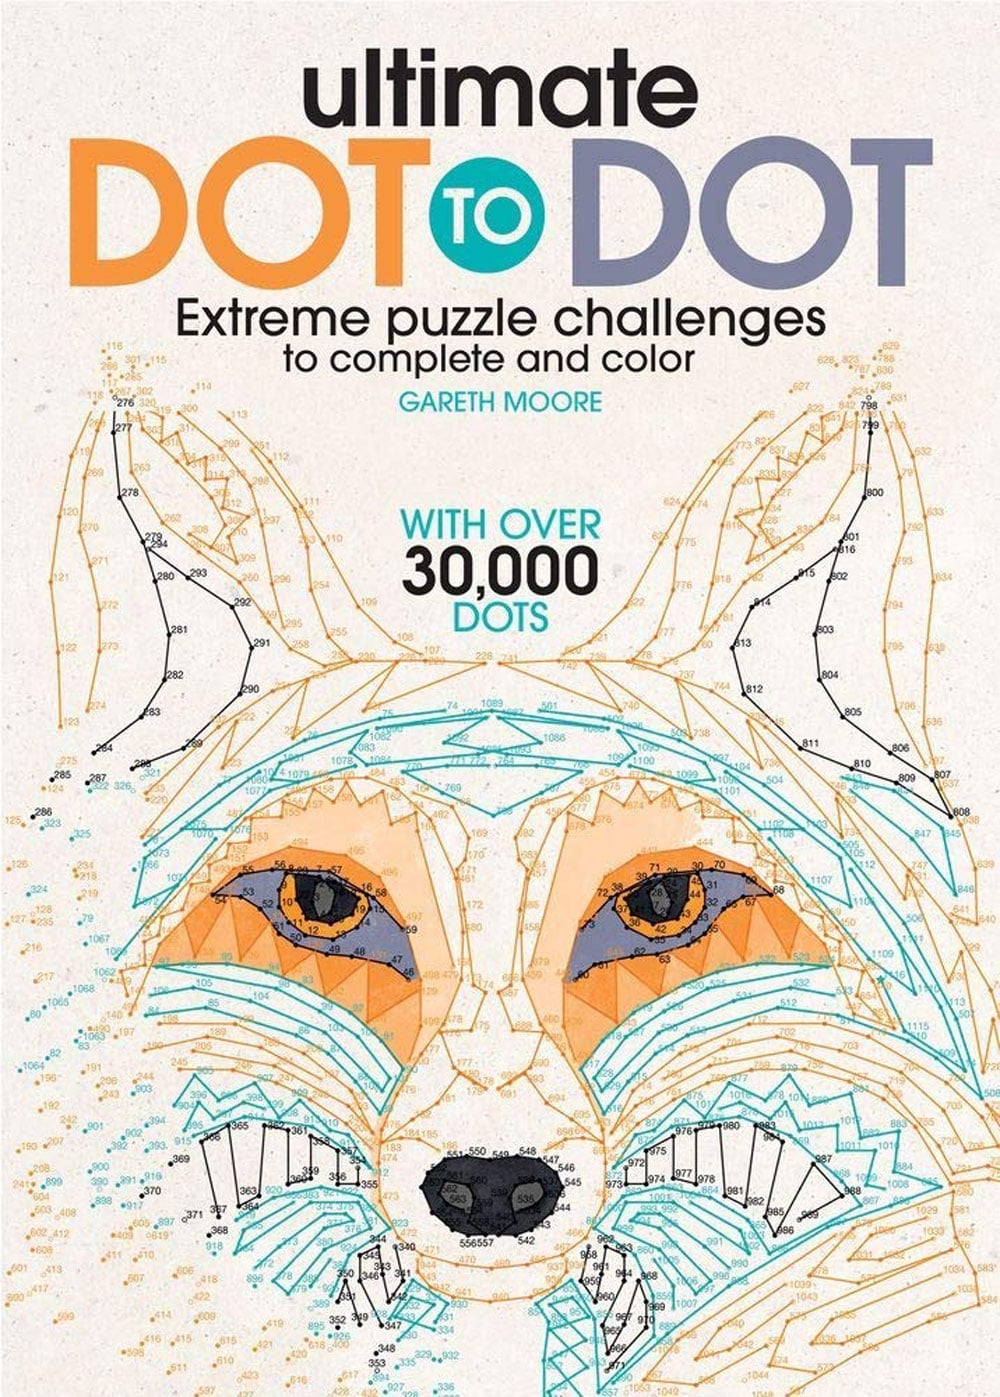 The Ultimate Dot To Dot Extreme Puzzle Challenges To Complete And Colour Best Mediative Coloring Books To Buy Popsugar Fitness Middle East Photo 2